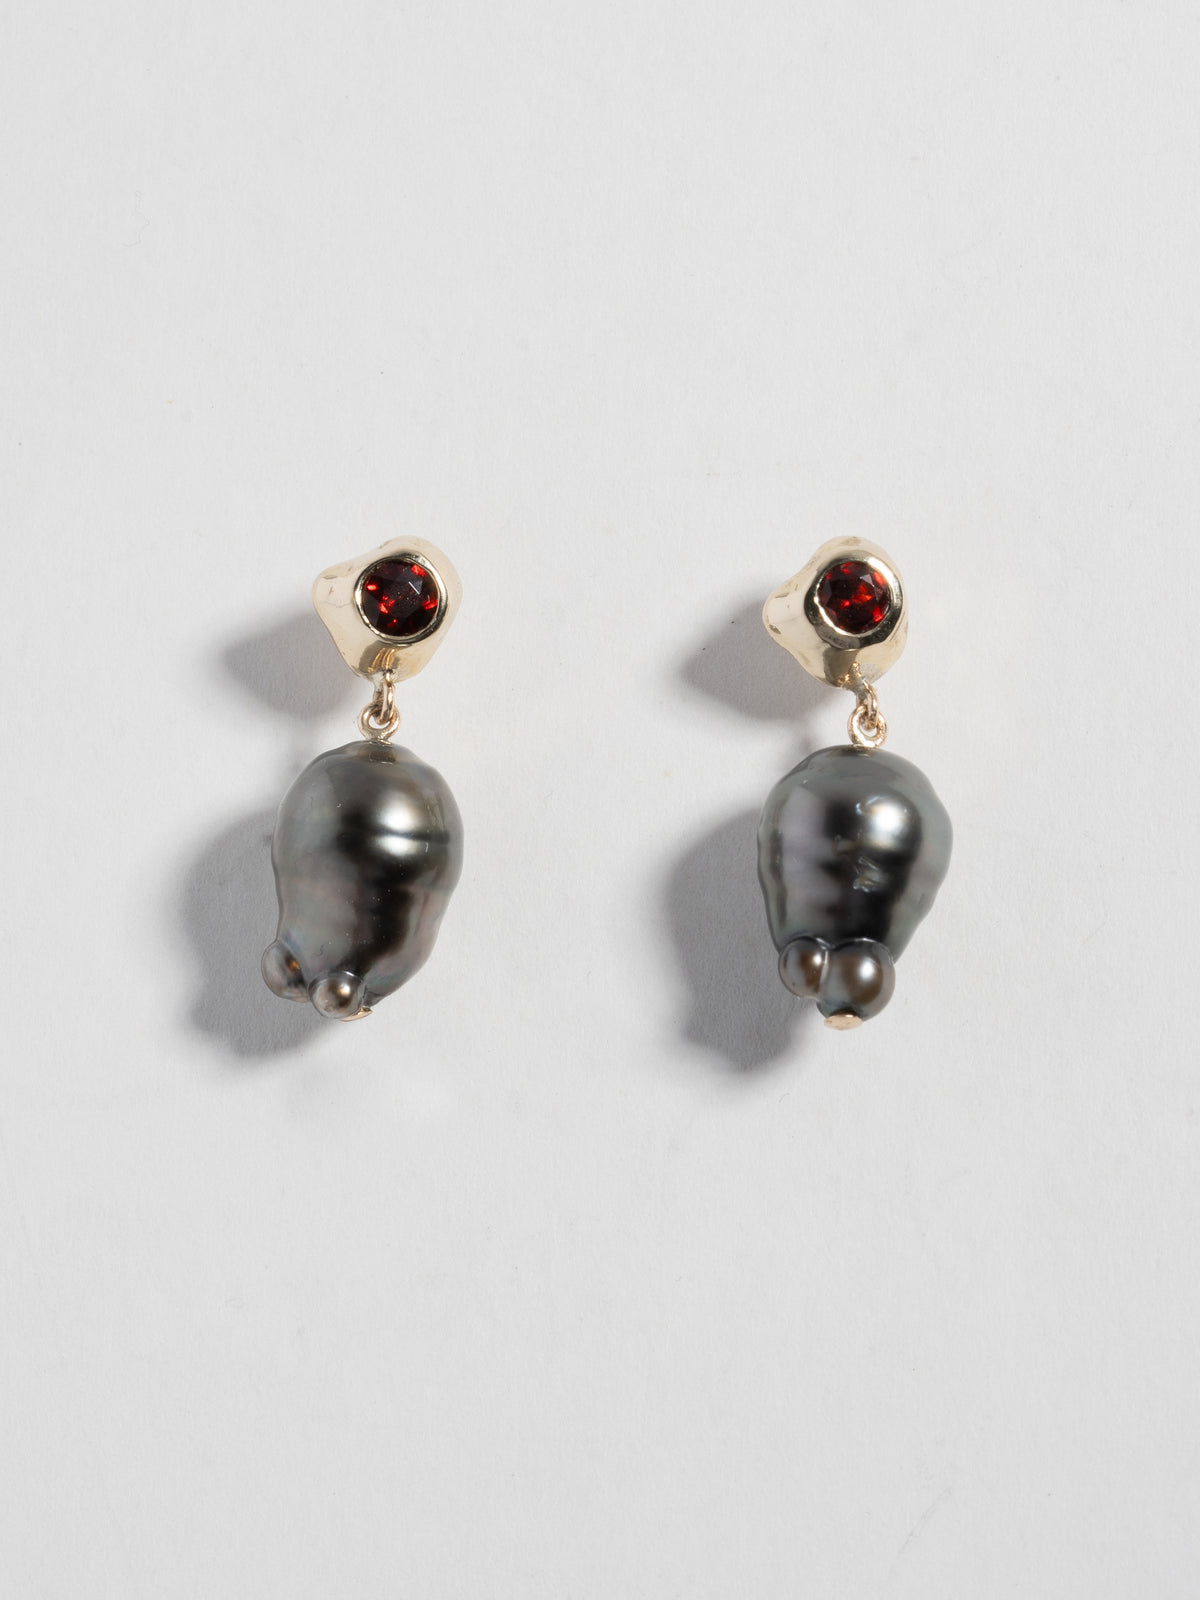 Product image of FARIS KIRA PERLA Earrings in 14k gold with garnet and black Tahitian pearls (positioned side by side, front view)